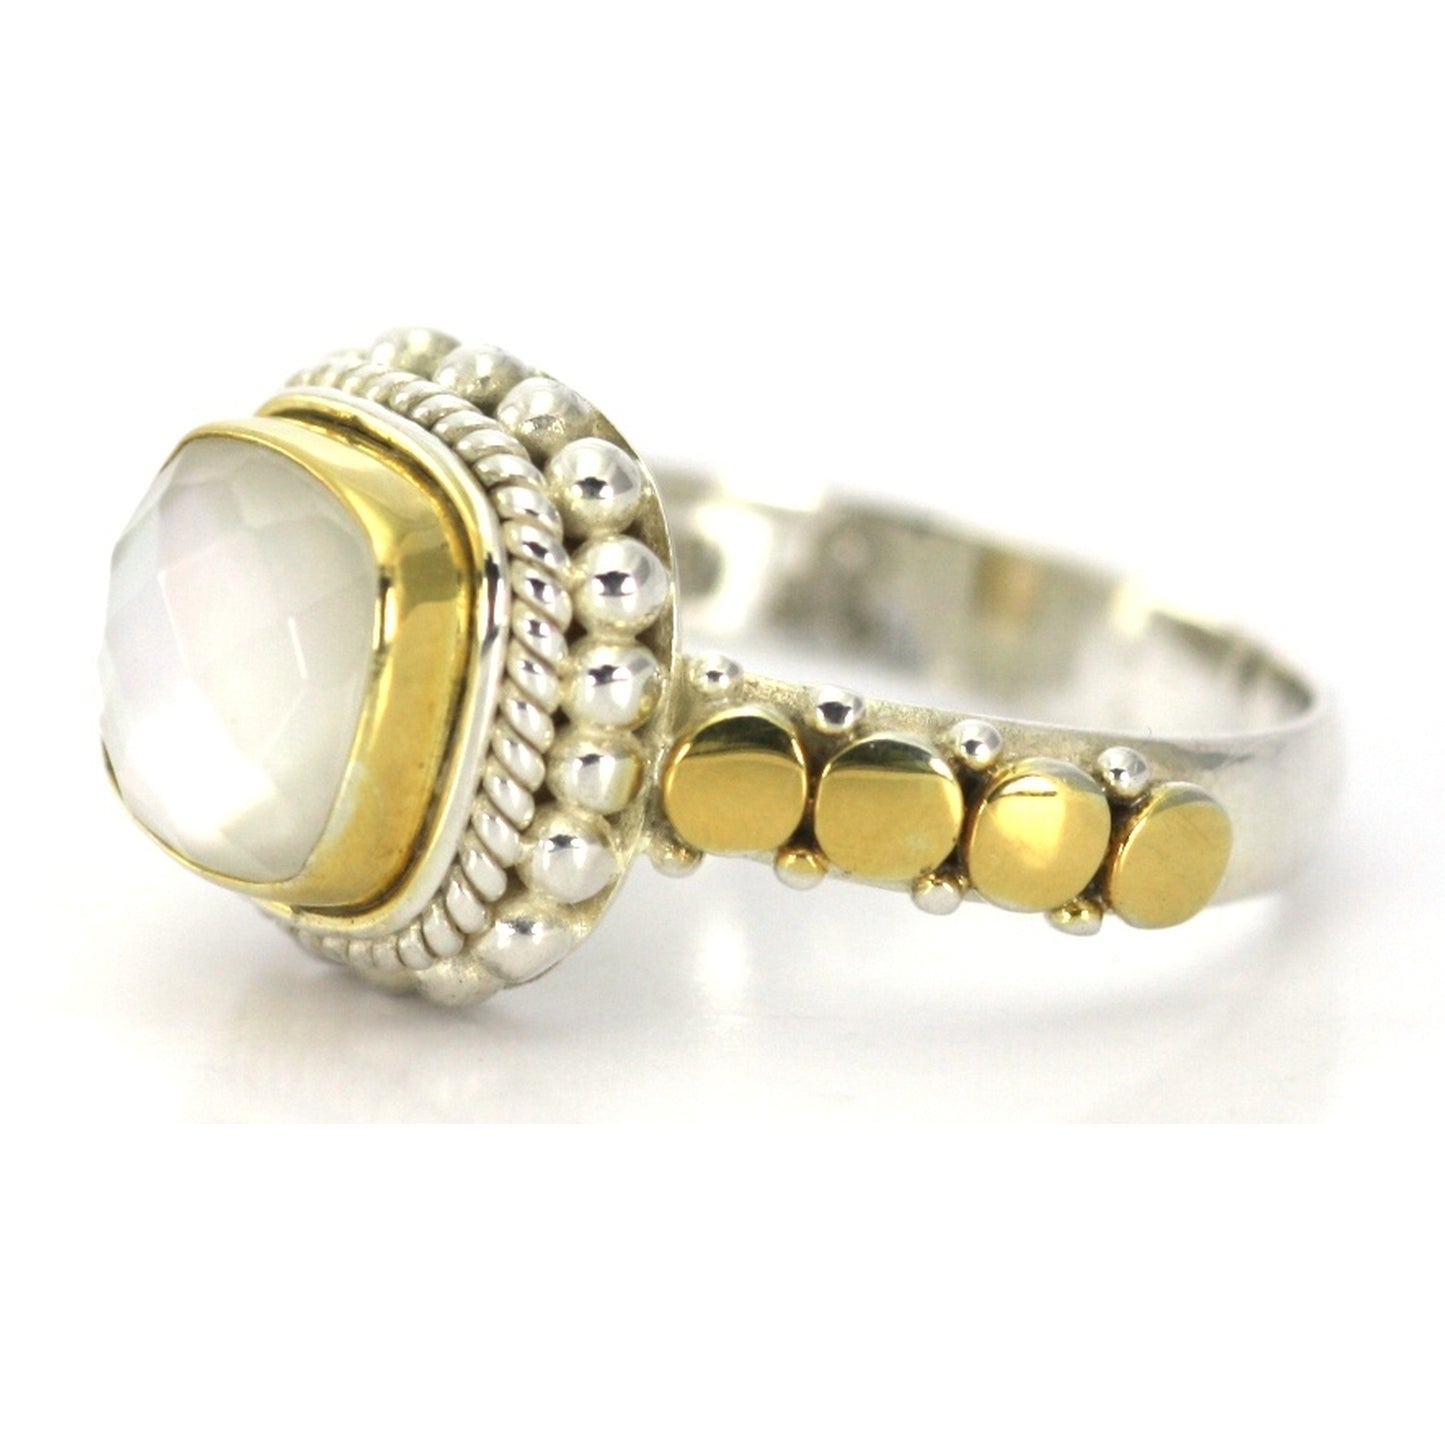 R009MPFG PADMA Silver and Gold Ring with a Mother of Pearl Doublet